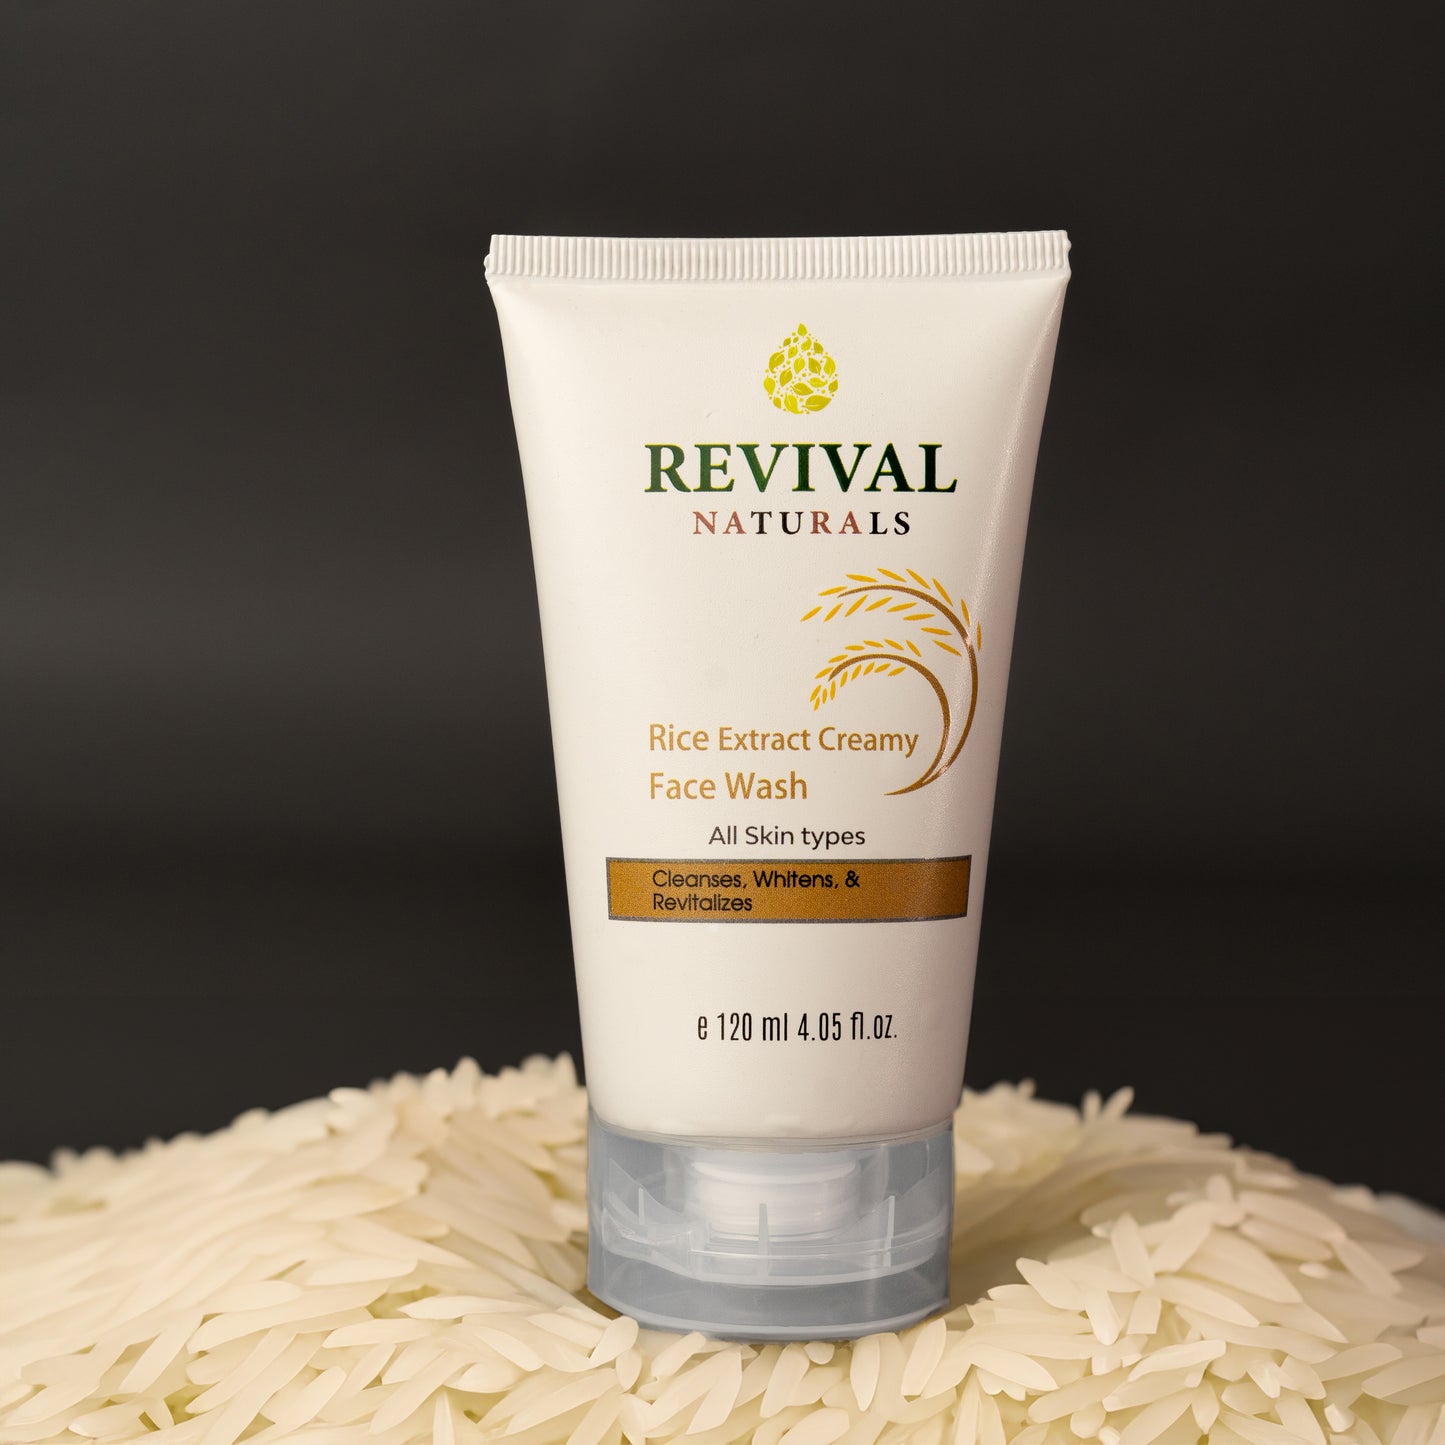 Rice Extract Creamy Face Wash